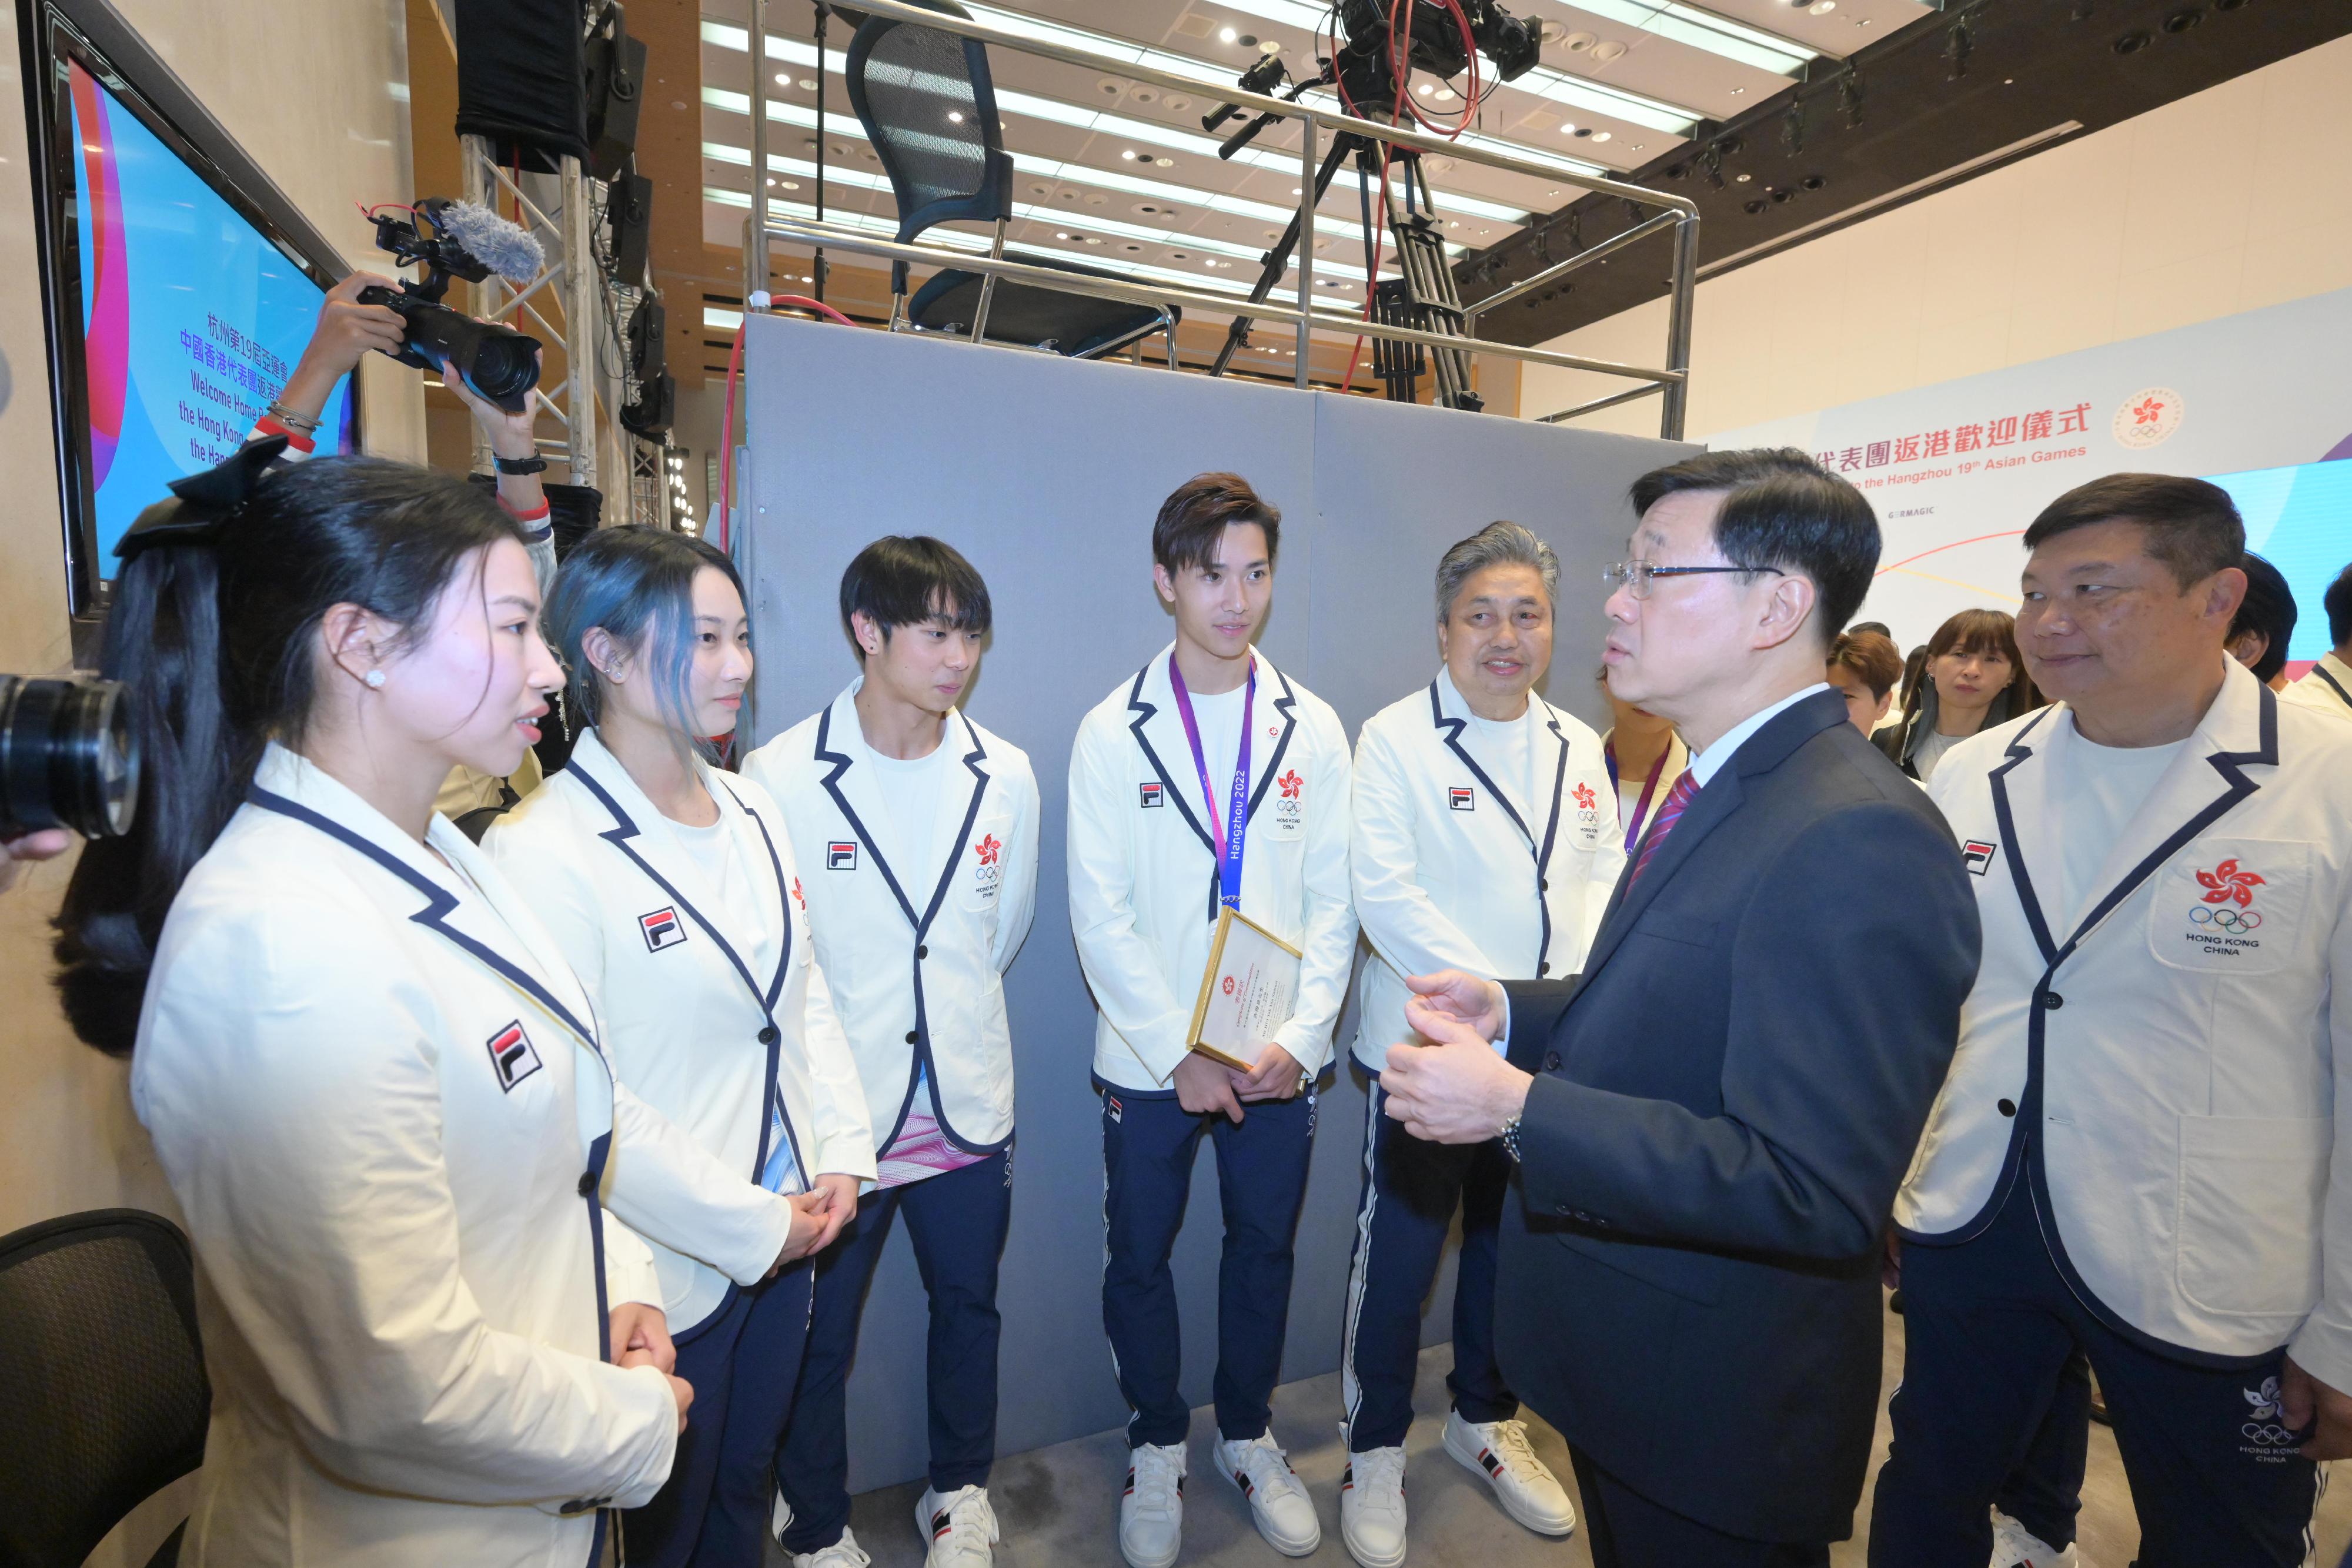 The Chief Executive, Mr John Lee, attended the welcome home reception for the Hong Kong, China Delegation to the 19th Asian Games Hangzhou today (October 14). Photo shows Mr Lee (second right) interacting with athletes.